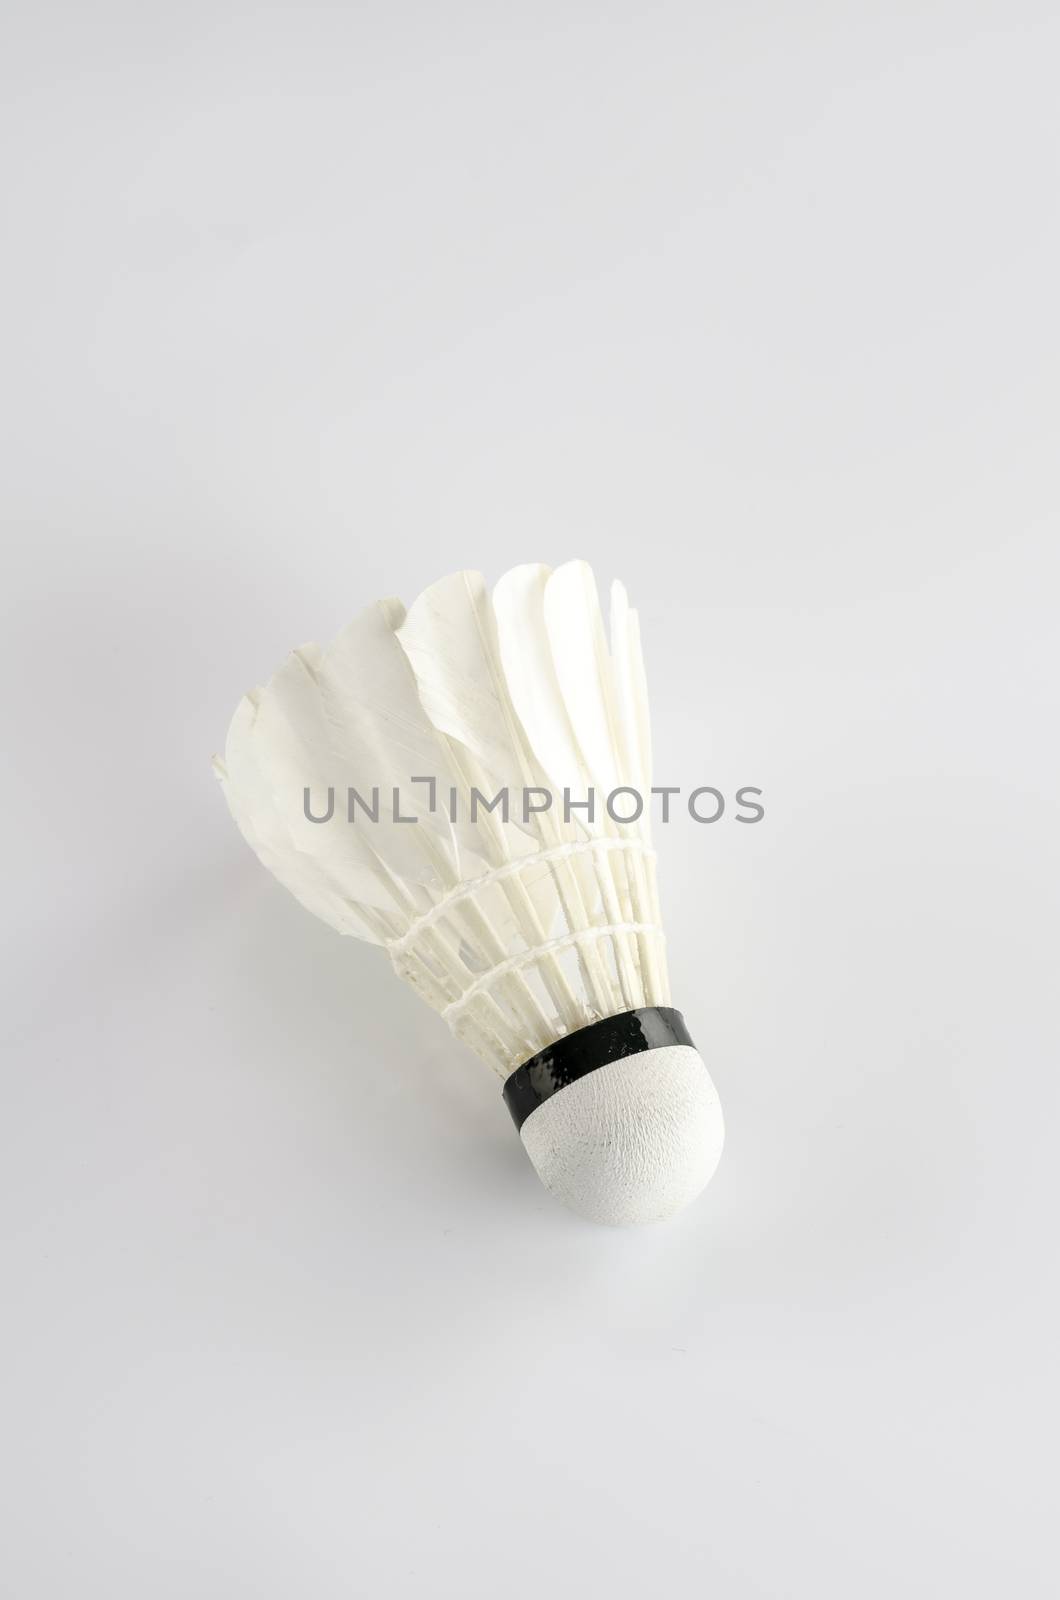 shutter cock on a white background